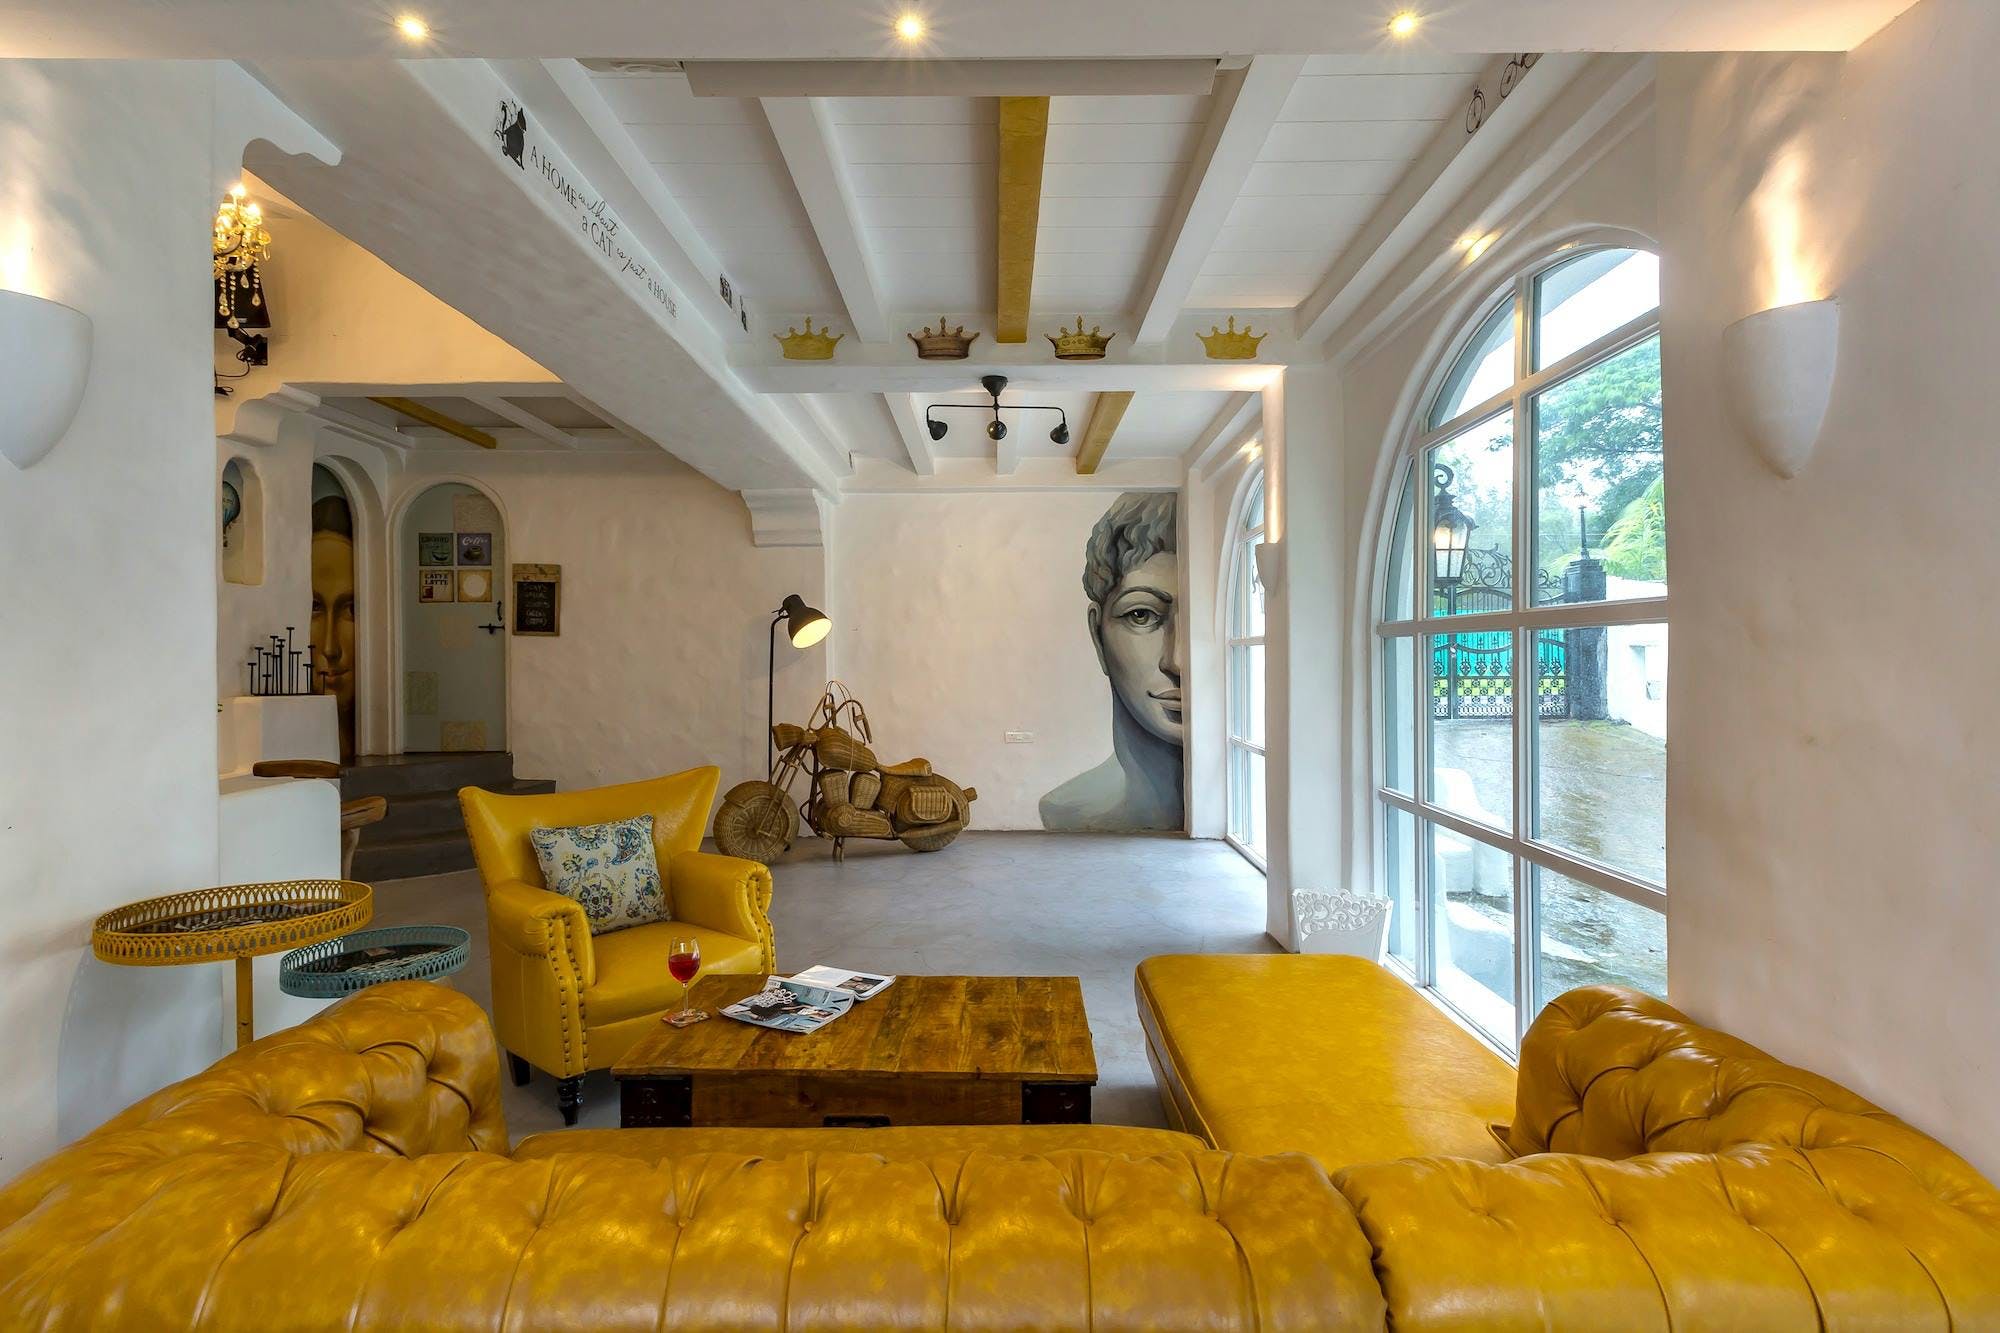 Room,Interior design,Living room,Ceiling,Property,Furniture,Yellow,Building,Home,House